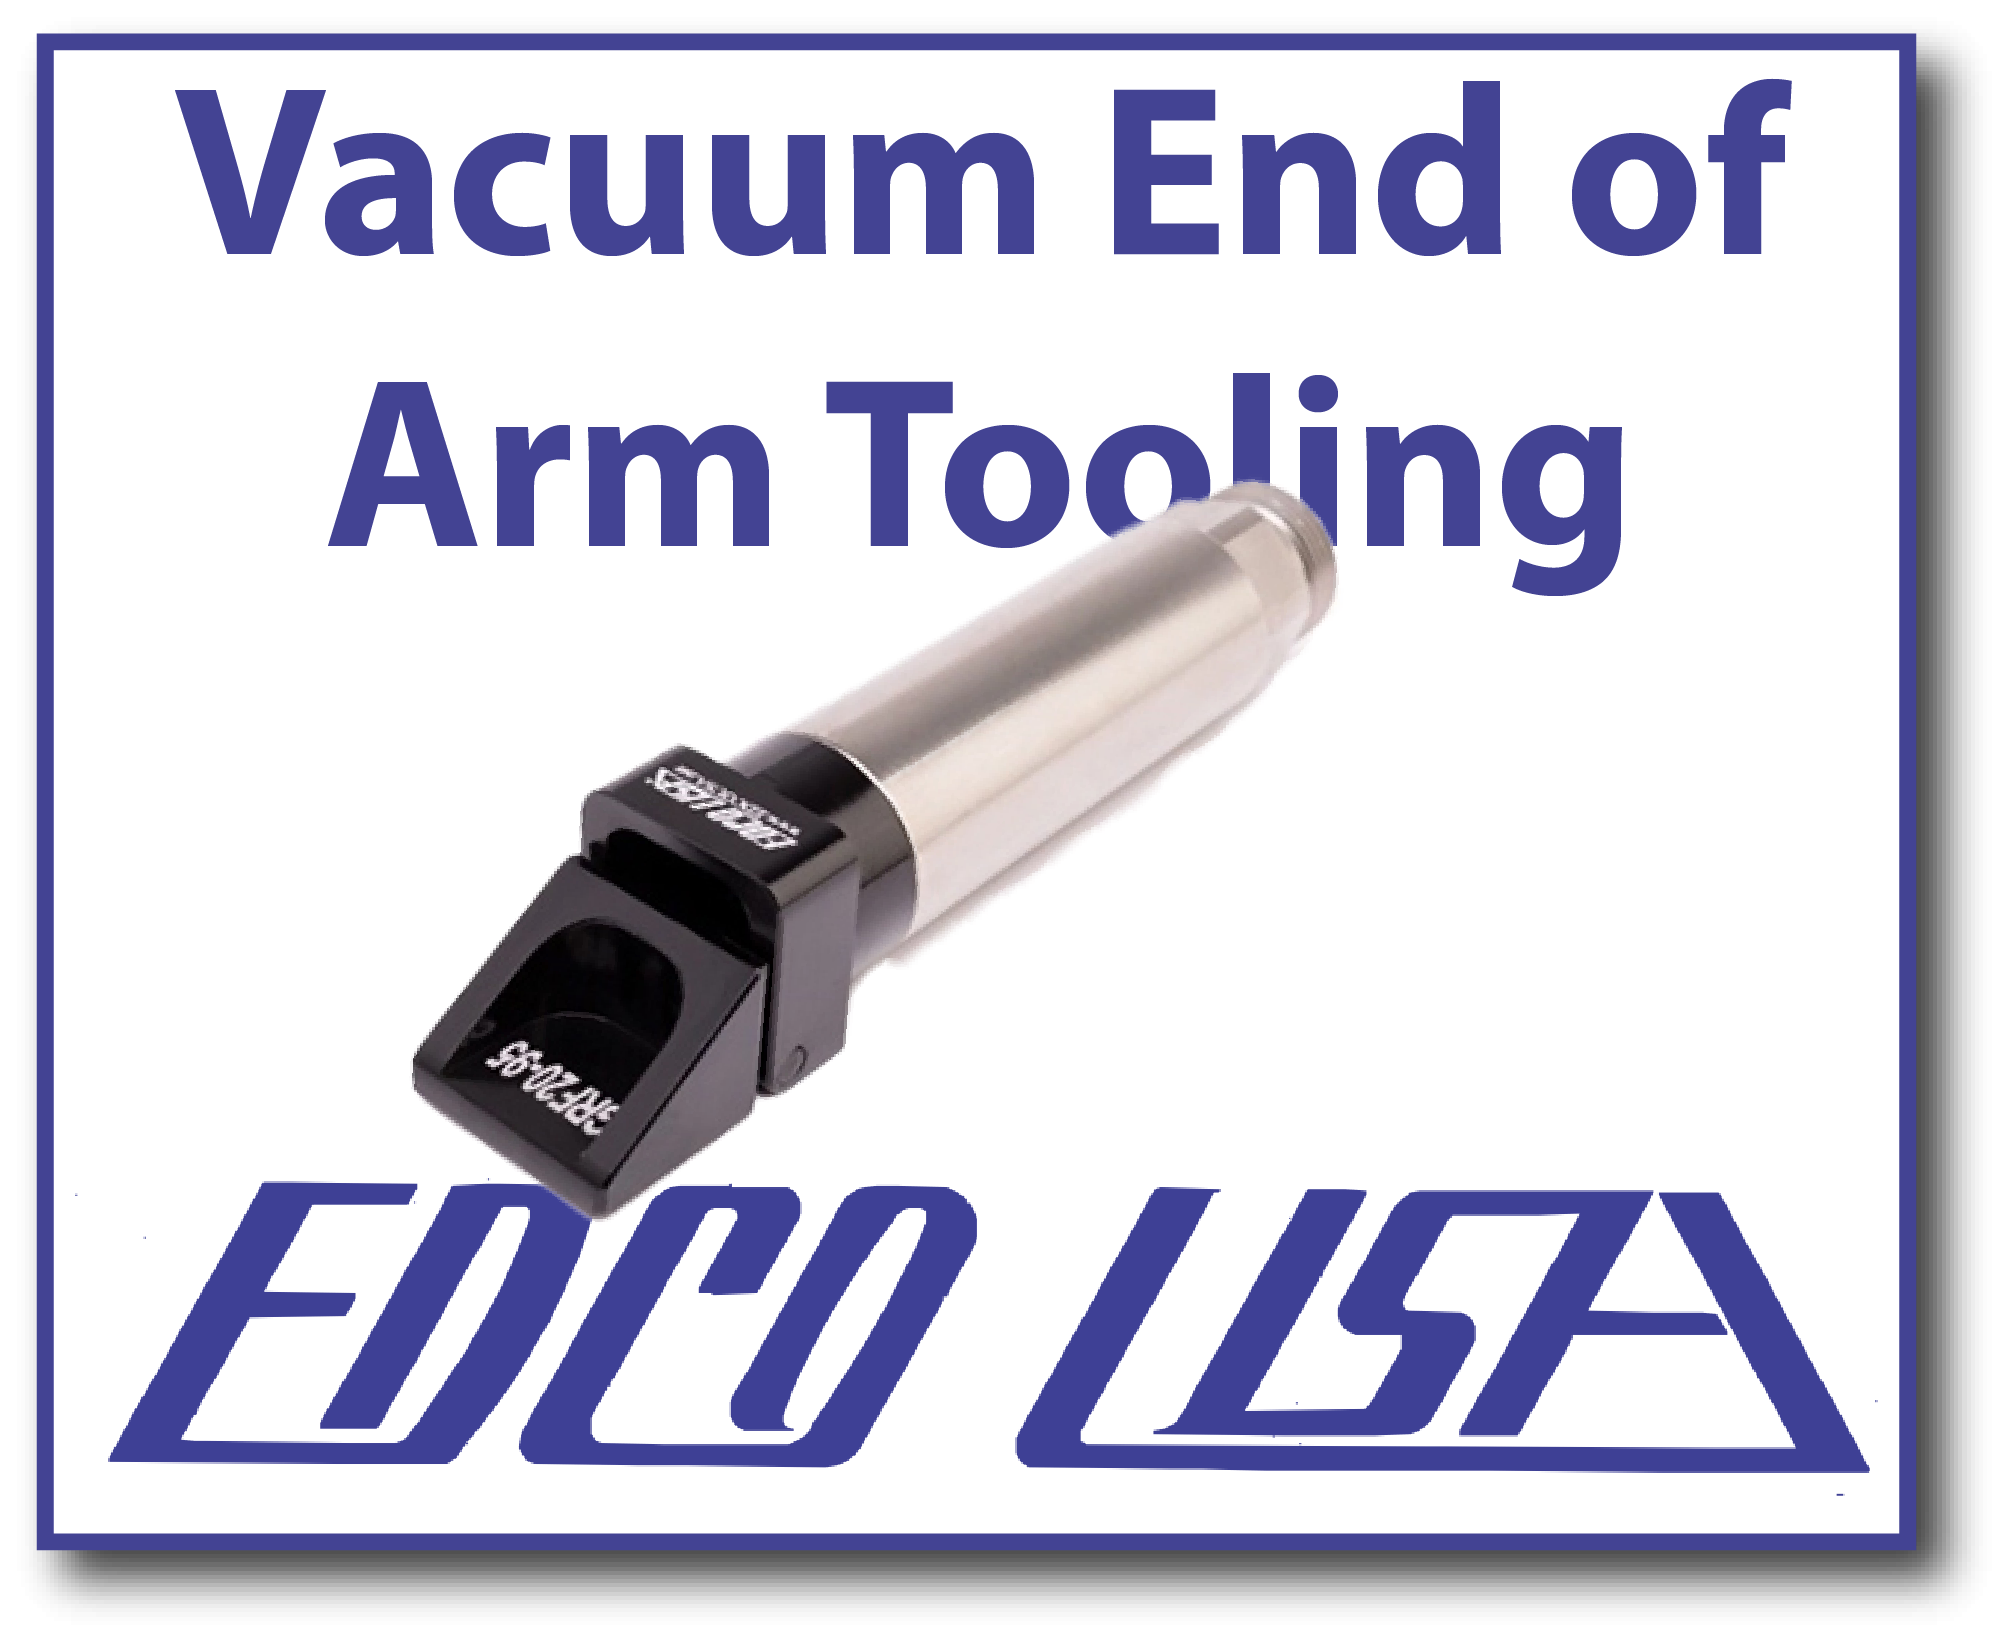 Edco Vacuum End of Arm Tooling